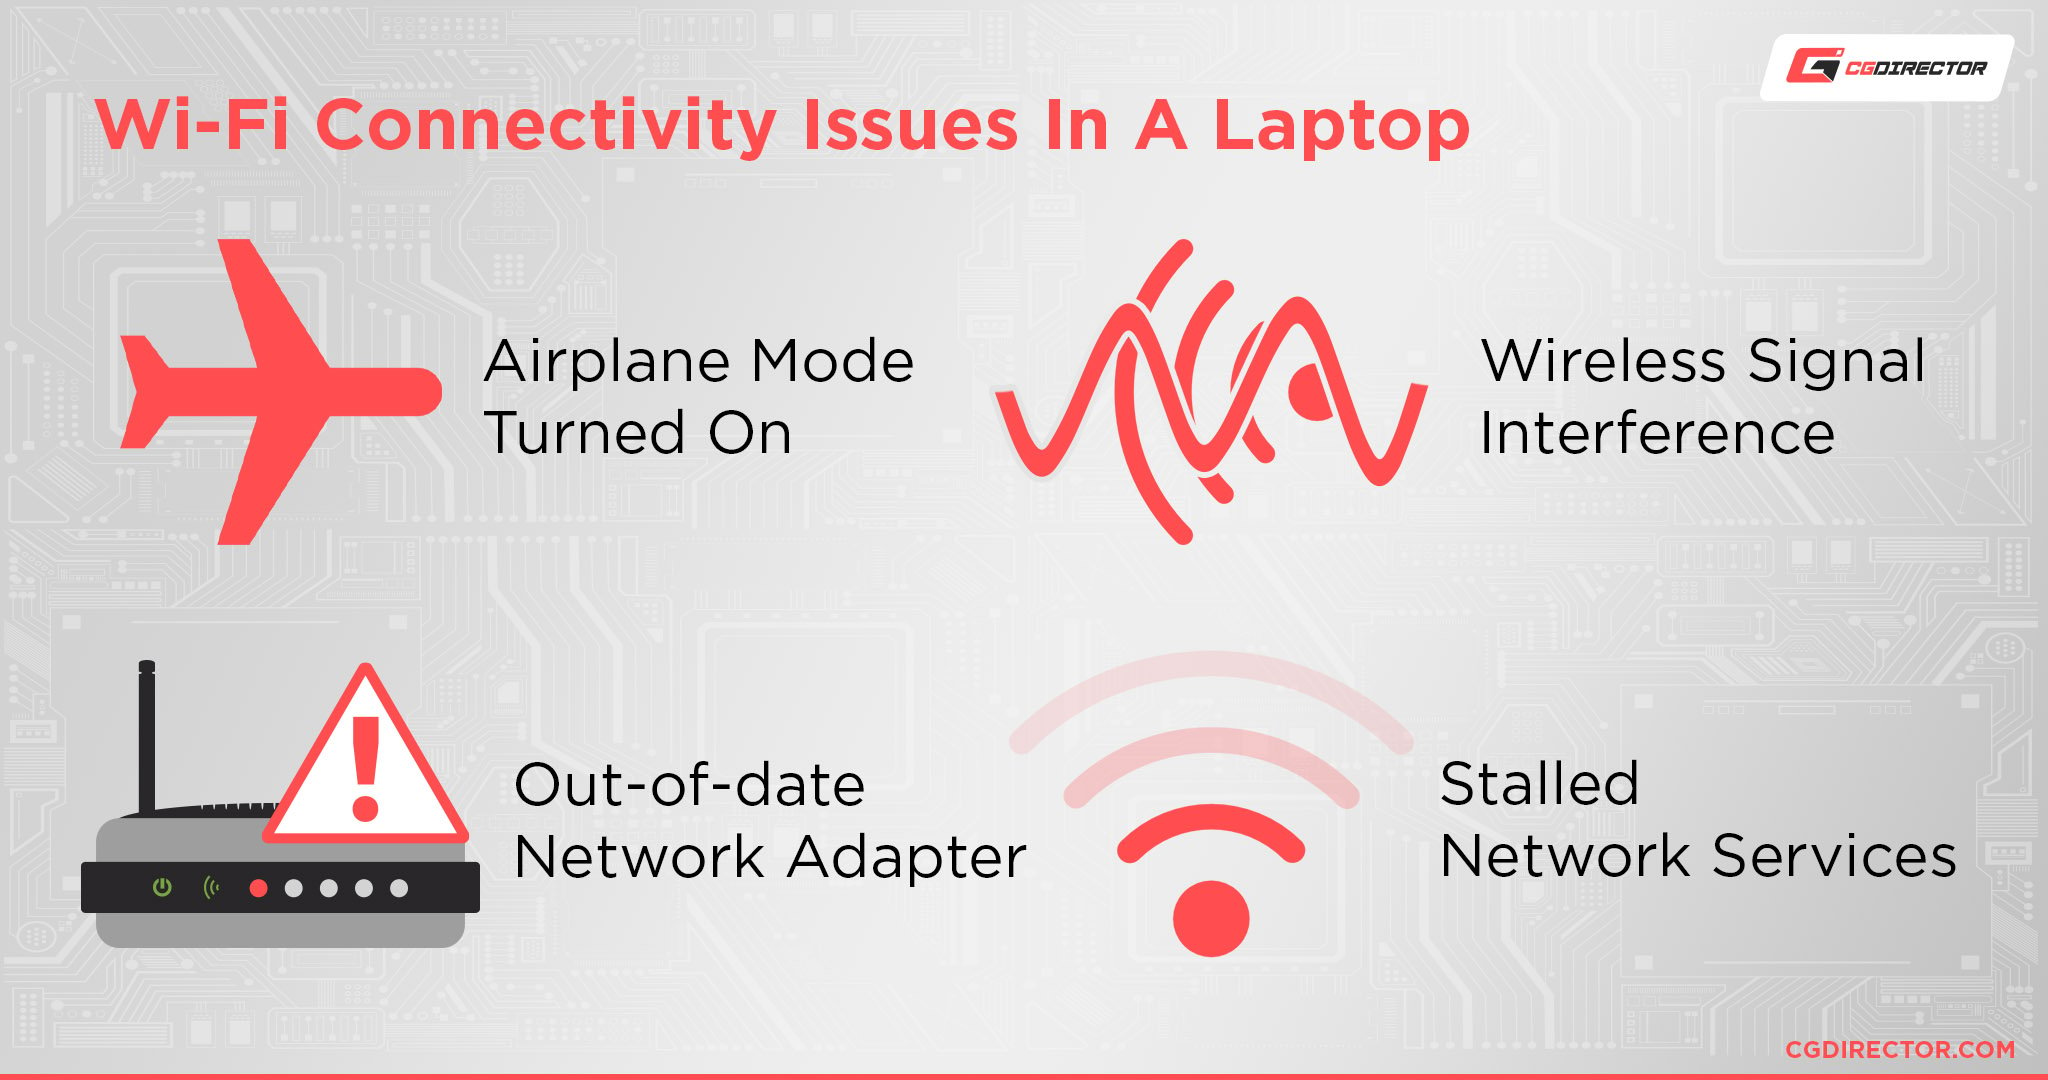 Wi-Fi Connectivity Issues In A Laptop